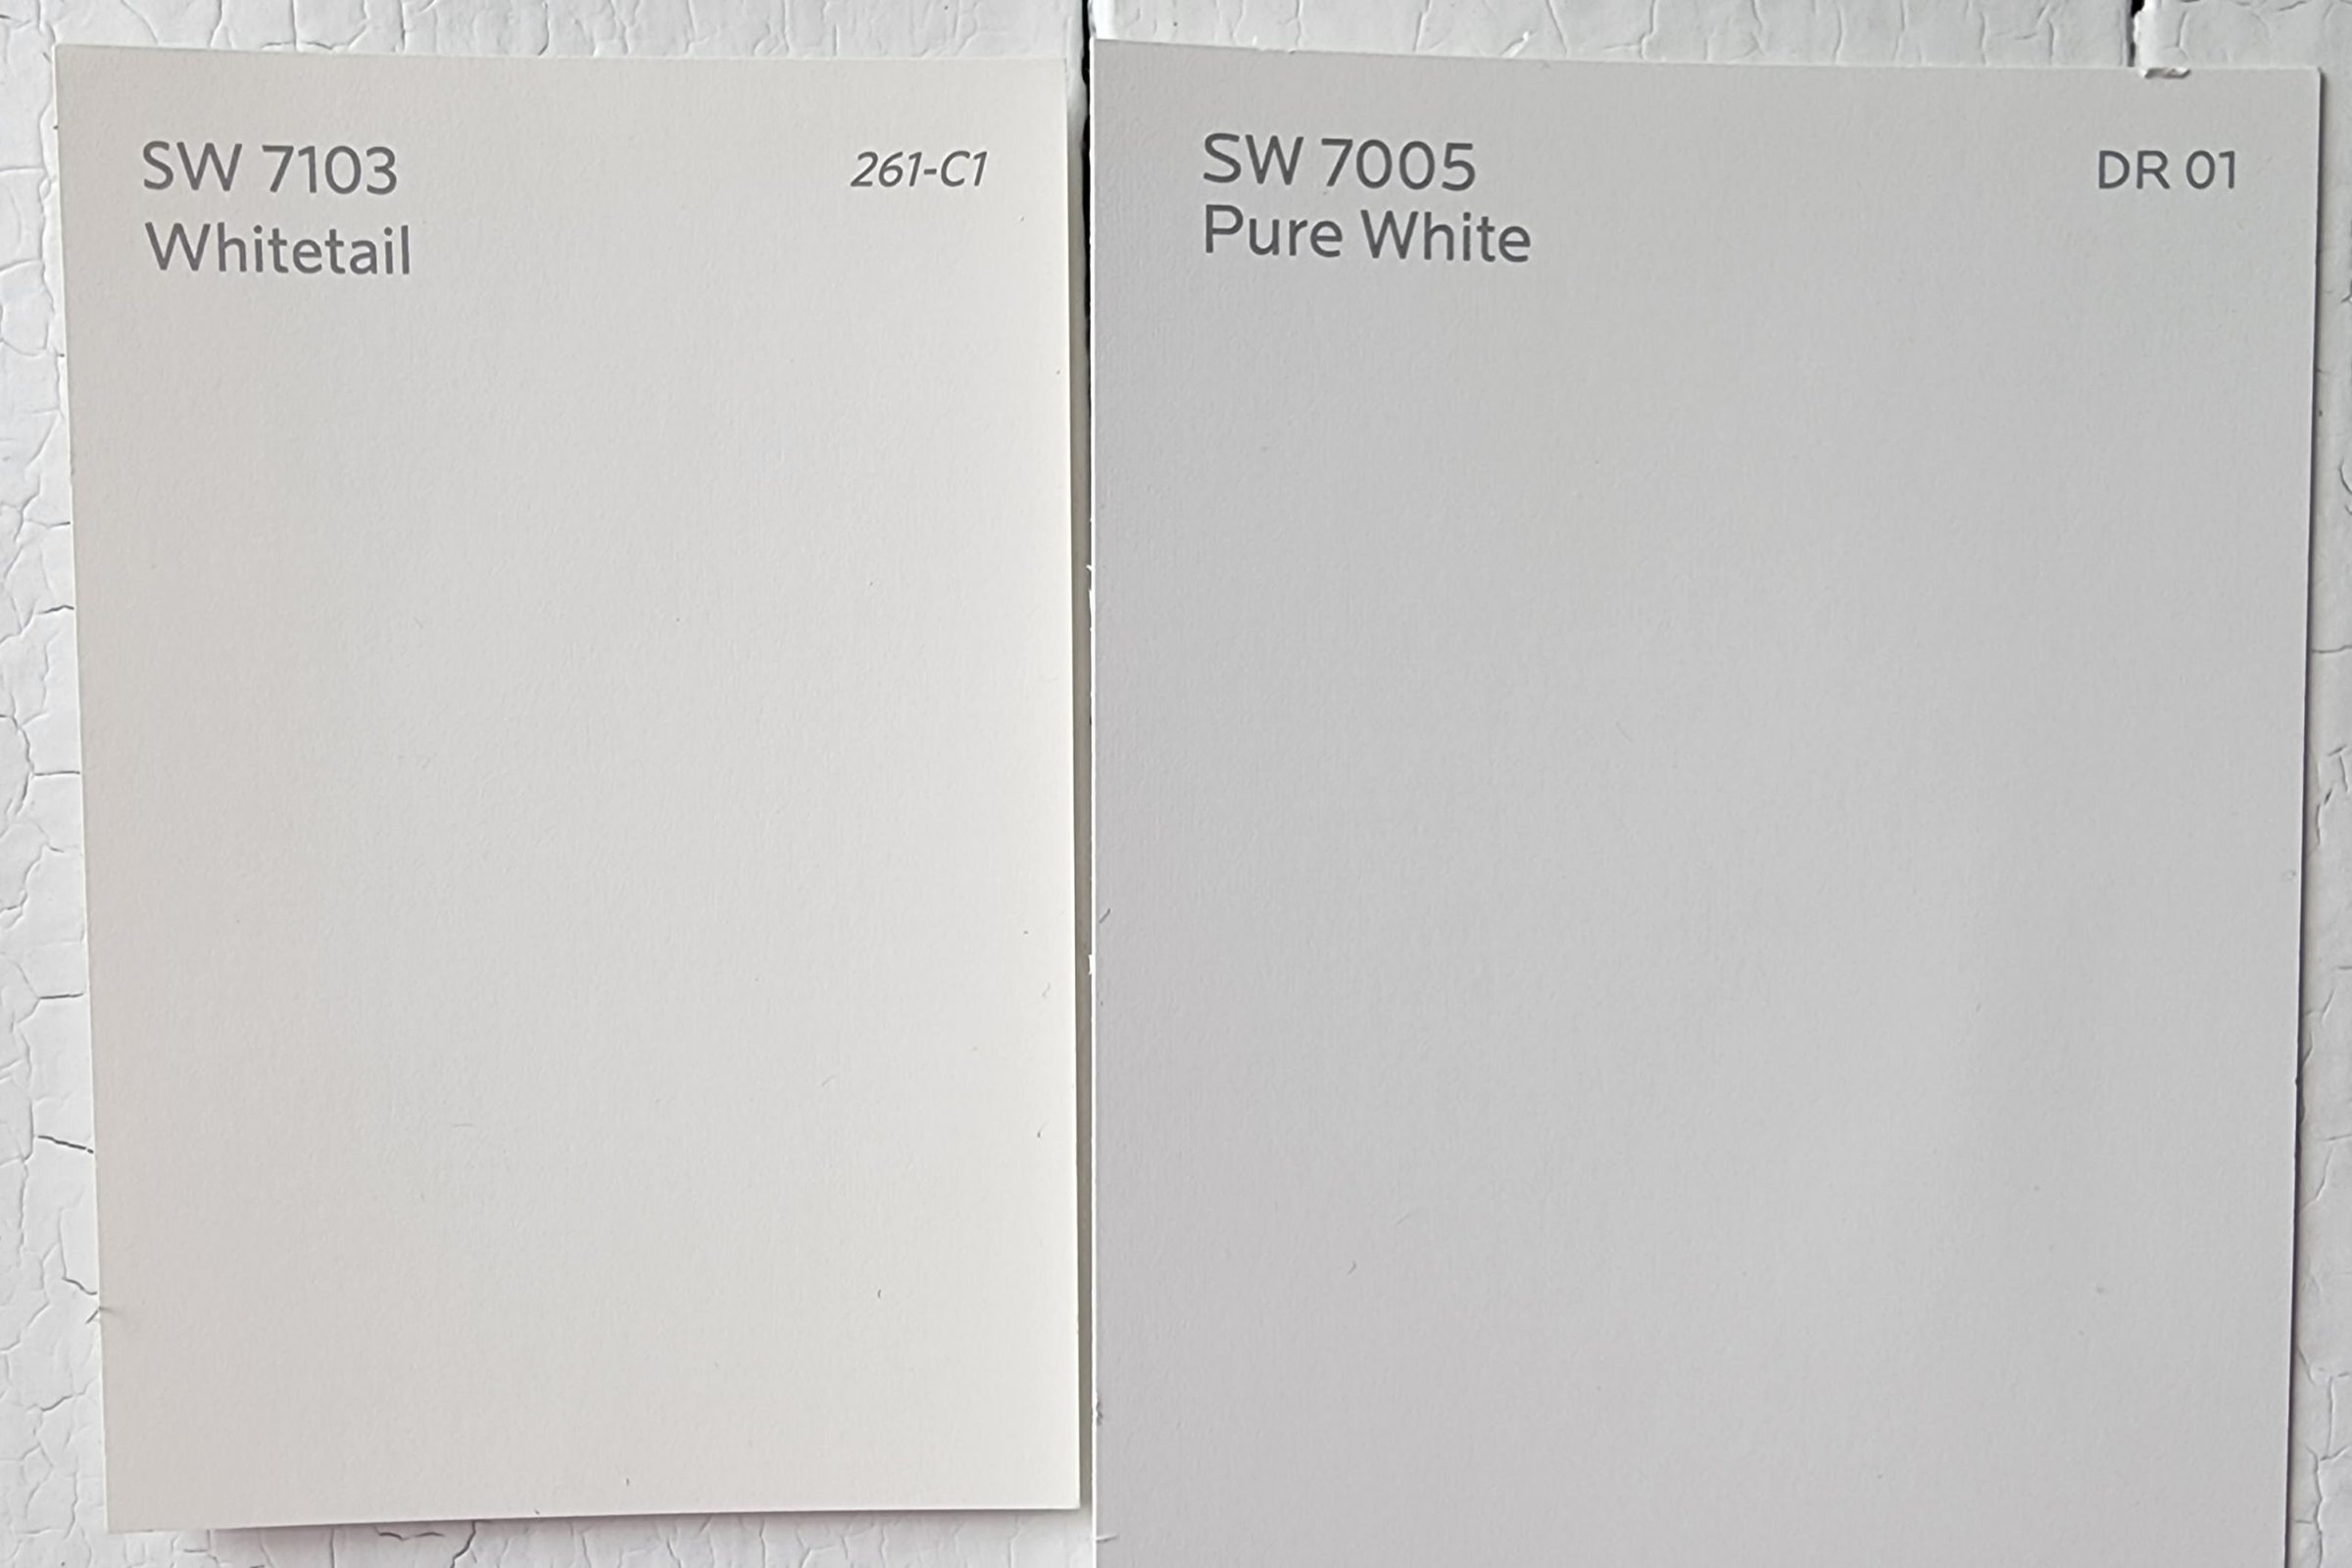  Whitetail vs Pure White by Sherwin Williams scaled